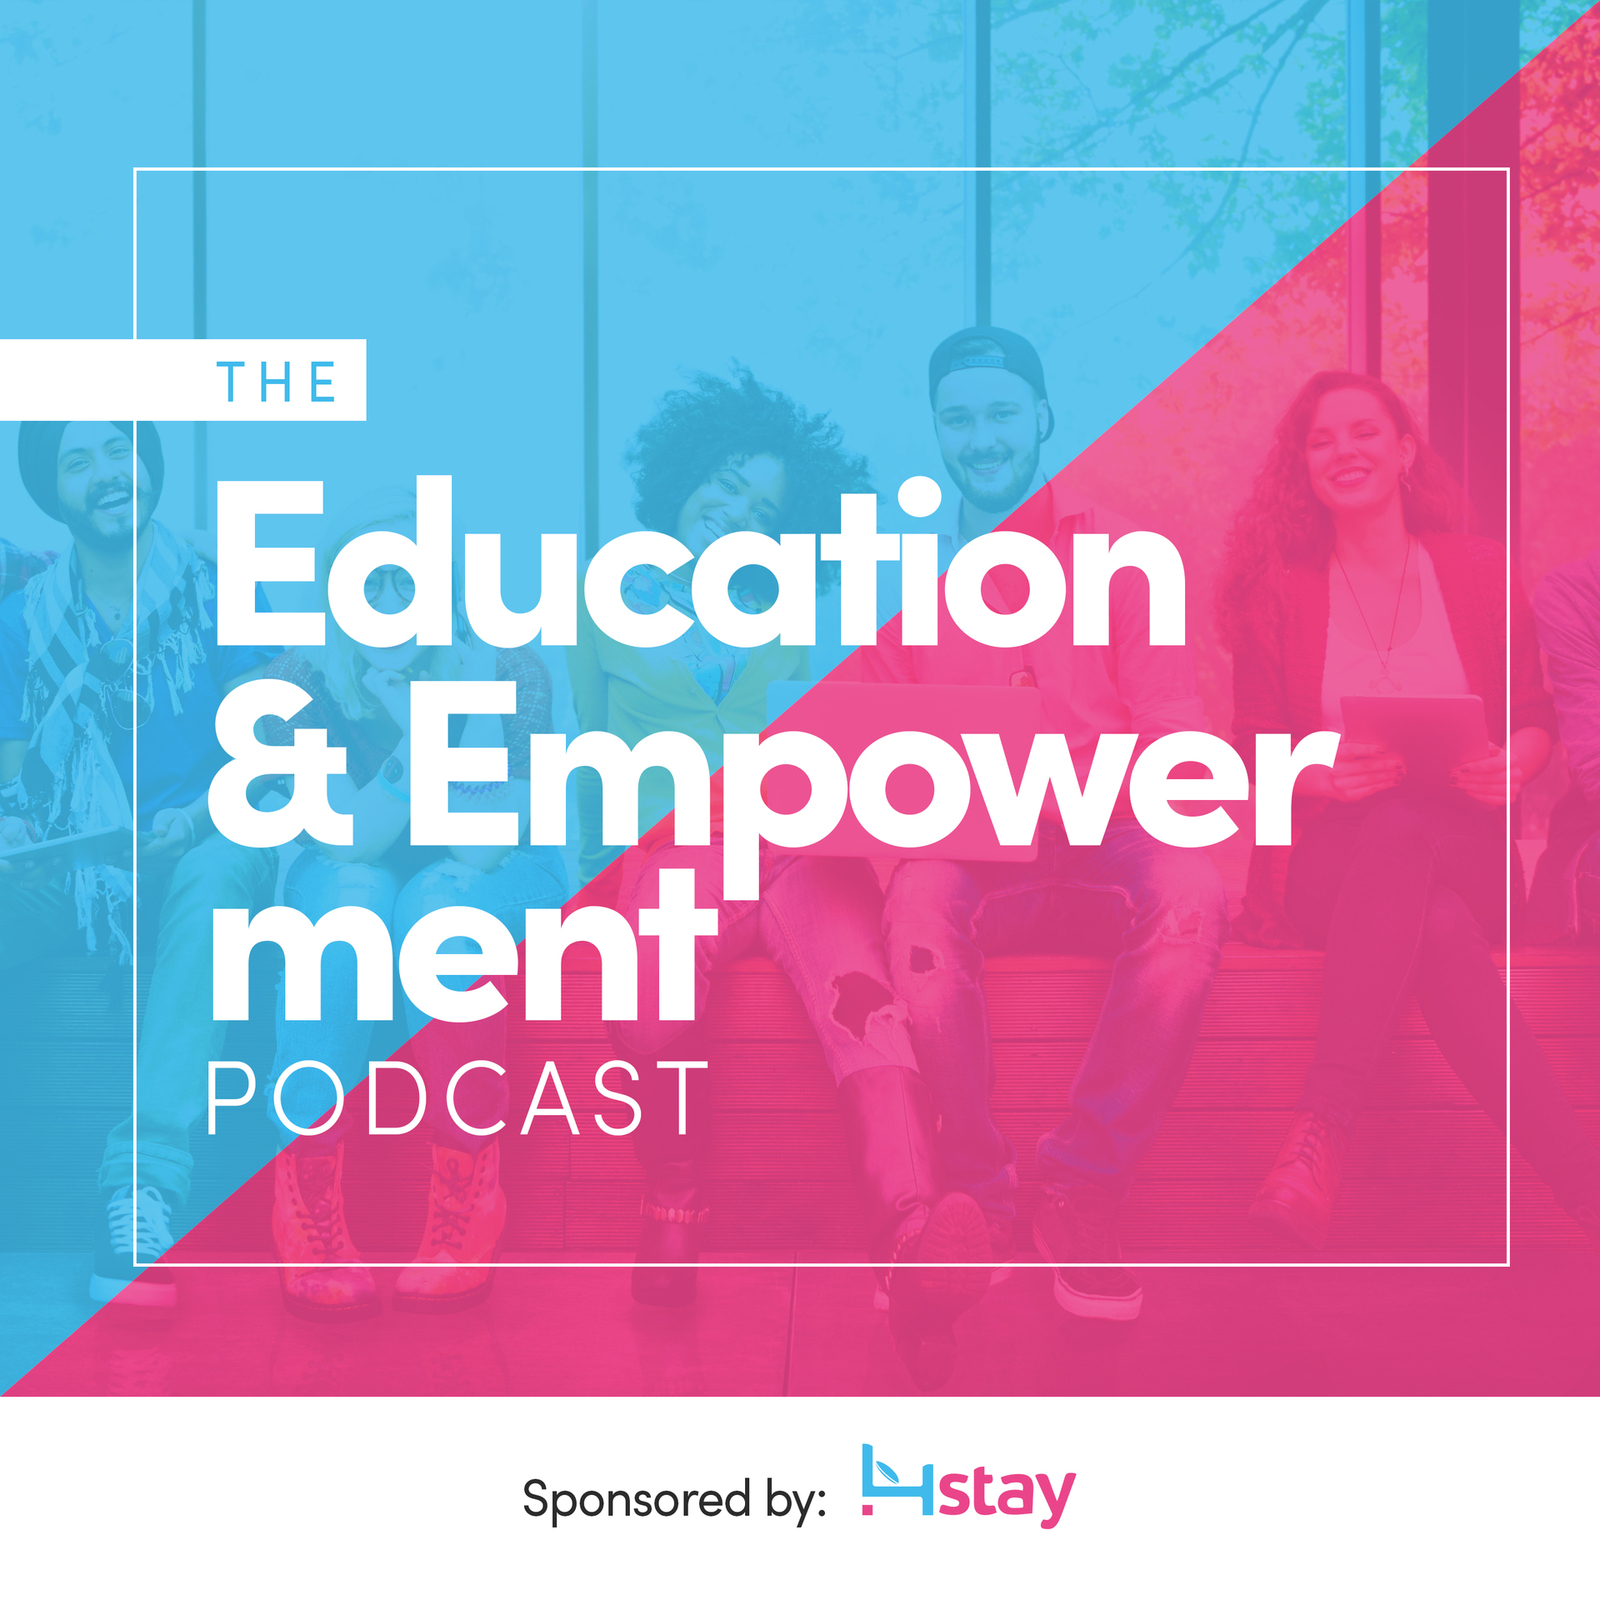 Bakhtiyor Isoev Released Two New Episodes of the Education & Empowerment Podcast